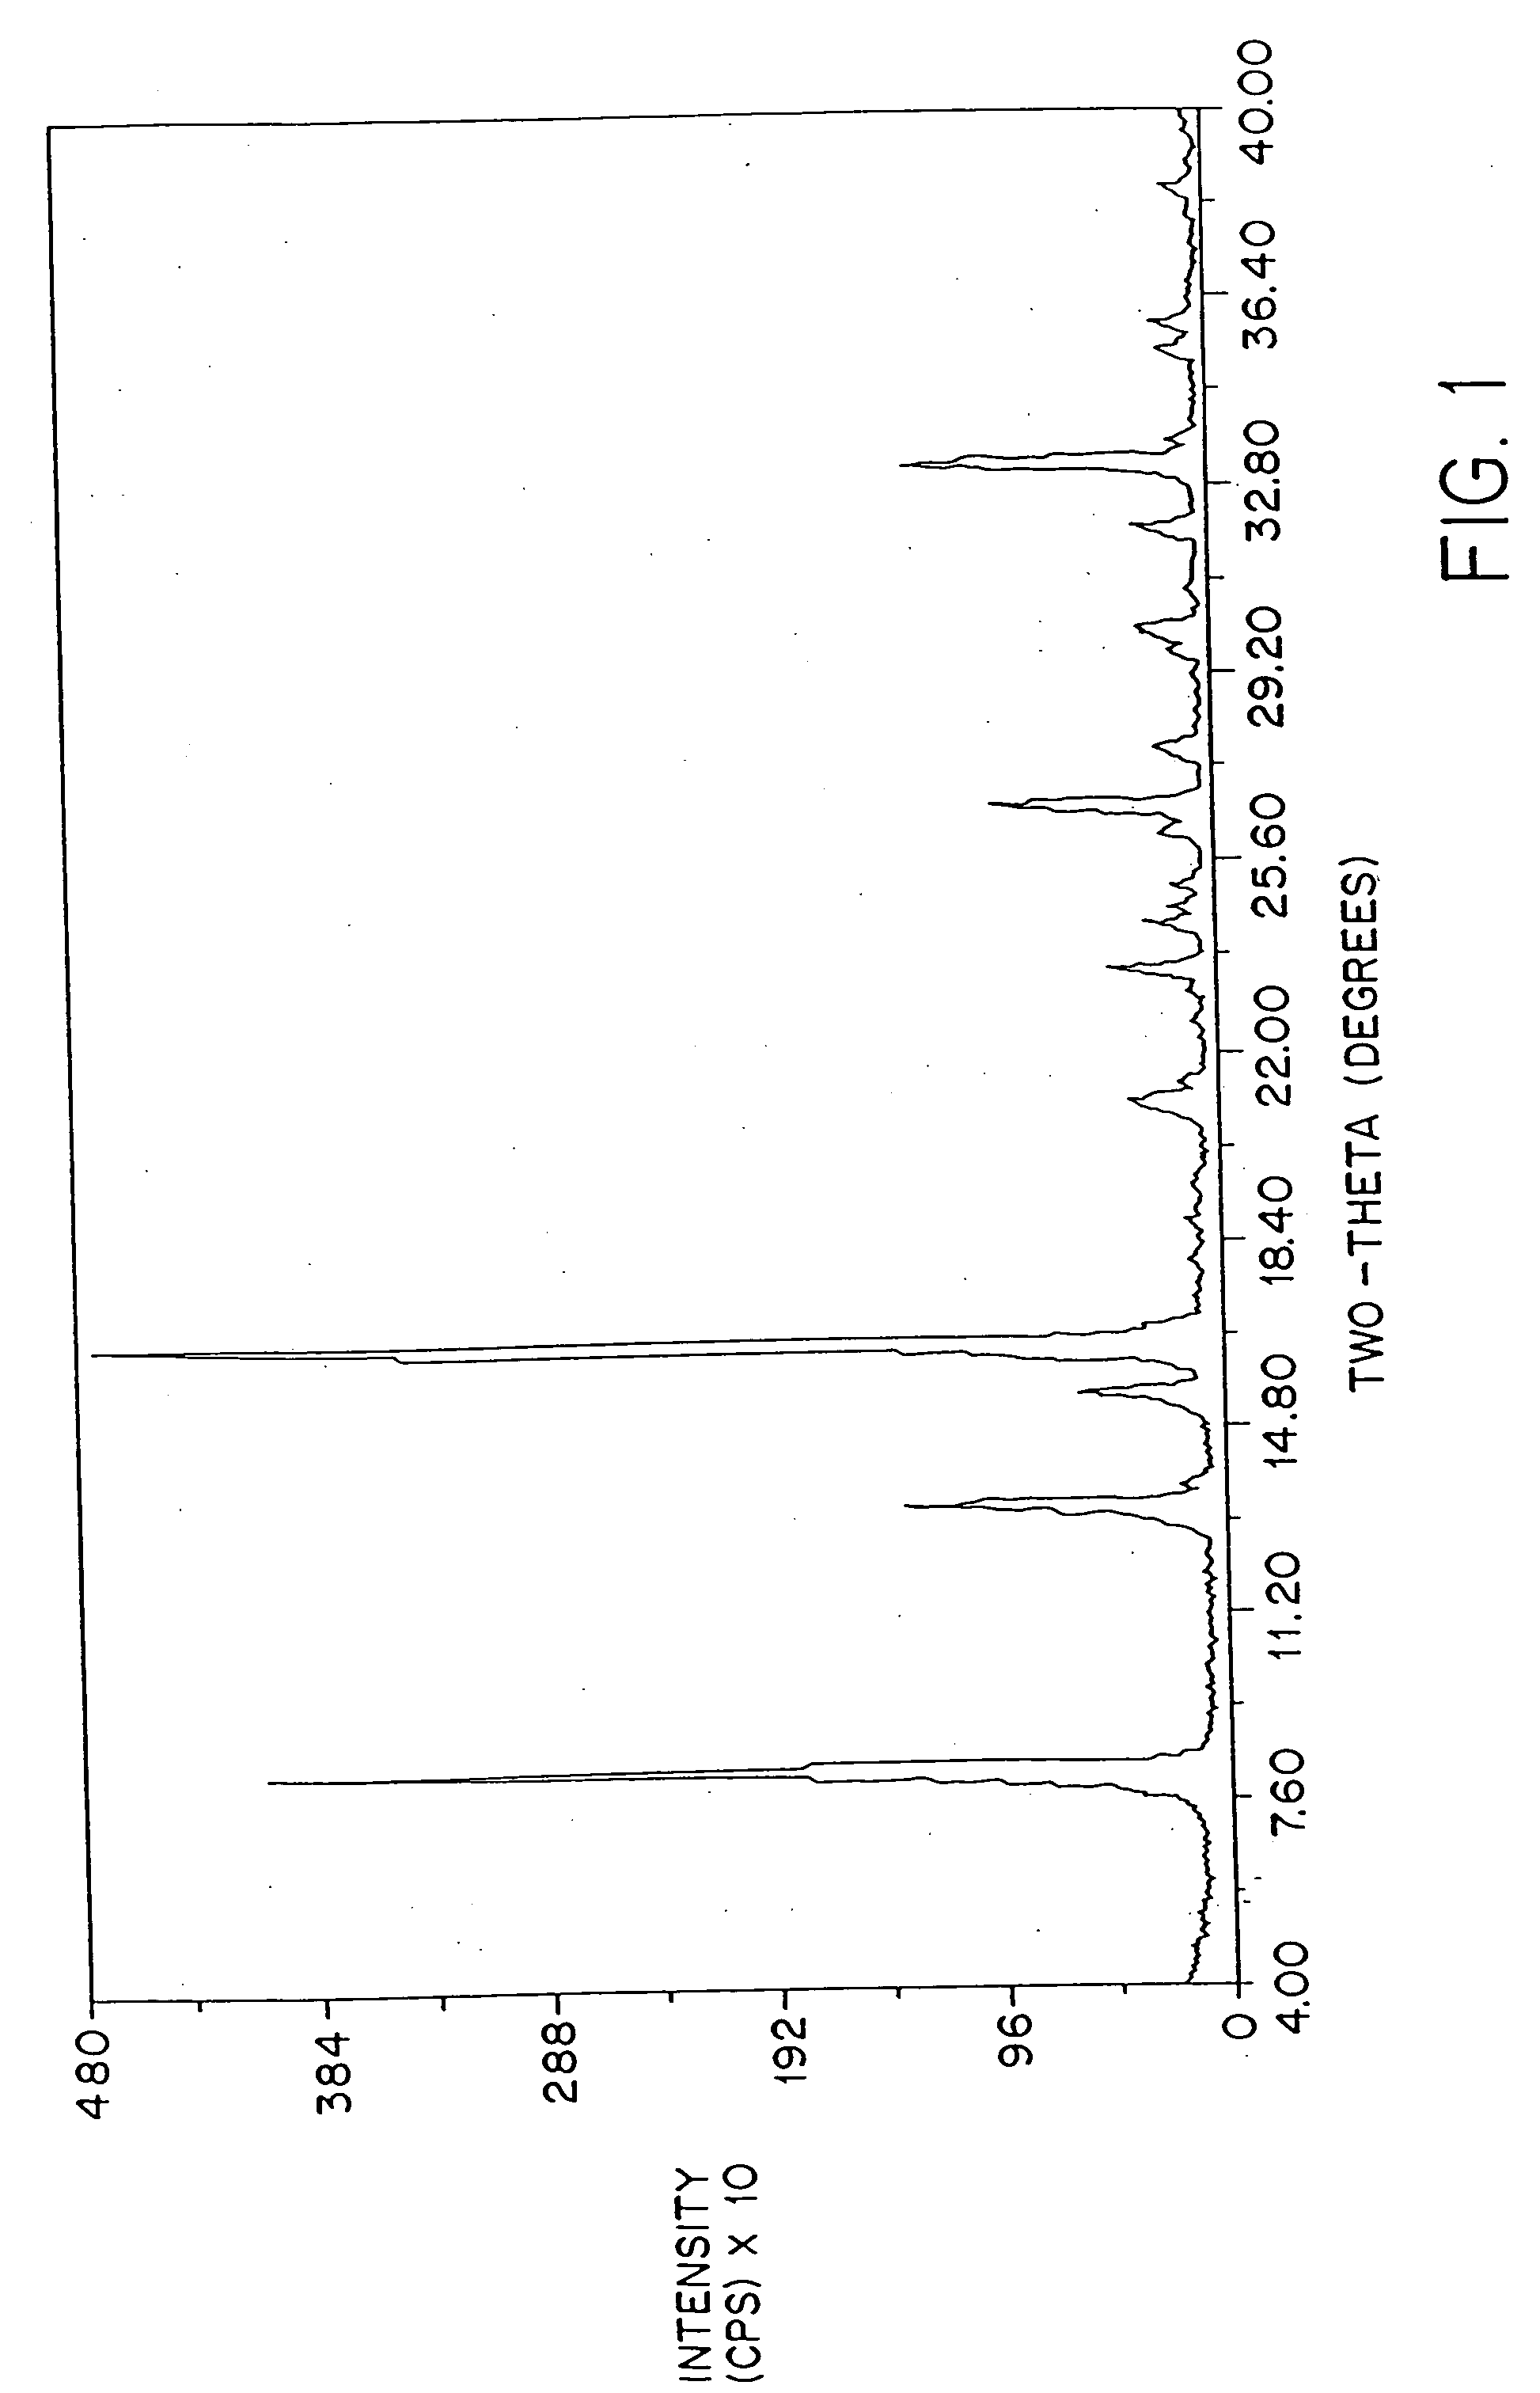 Stable amorphous amifostine compositions and methods for the preparation and use of same